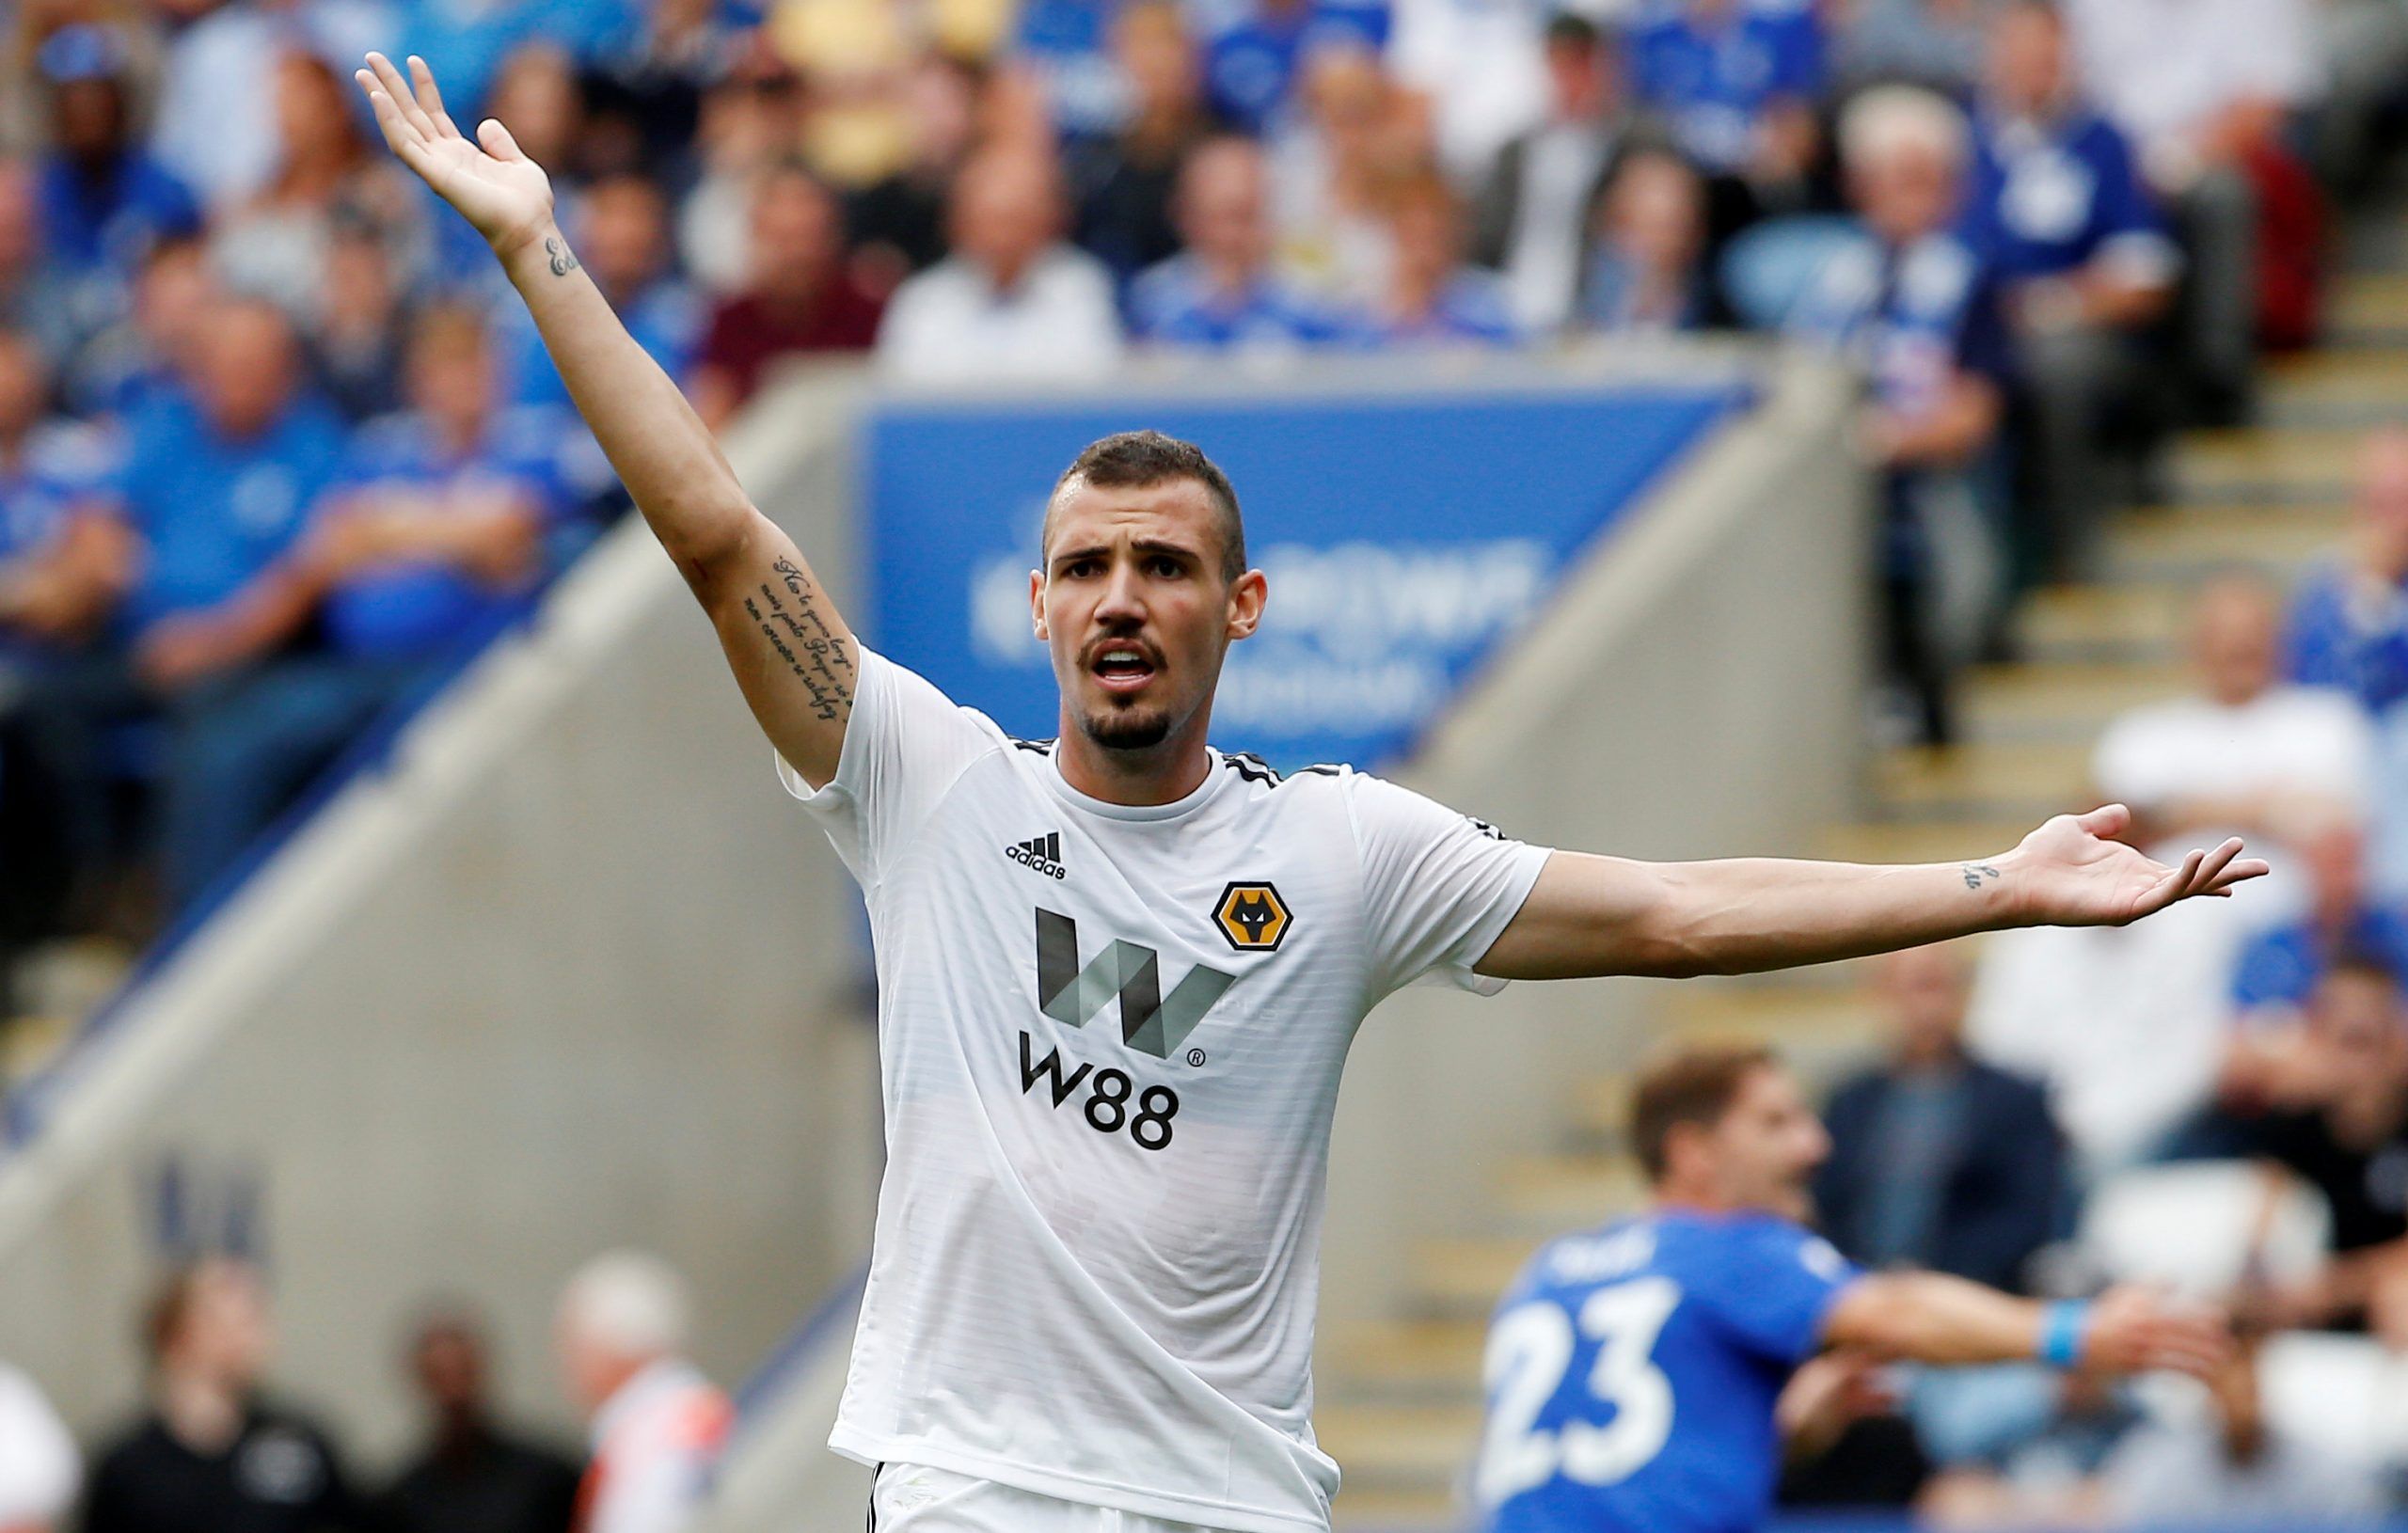 Soccer Football - Premier League - Leicester City v Wolverhampton Wanderers - King Power Stadium, Leicester, Britain - August 18, 2018   Wolverhampton Wanderers' Leo Bonatini reacts      Action Images via Reuters/Craig Brough    EDITORIAL USE ONLY. No use with unauthorized audio, video, data, fixture lists, club/league logos or 